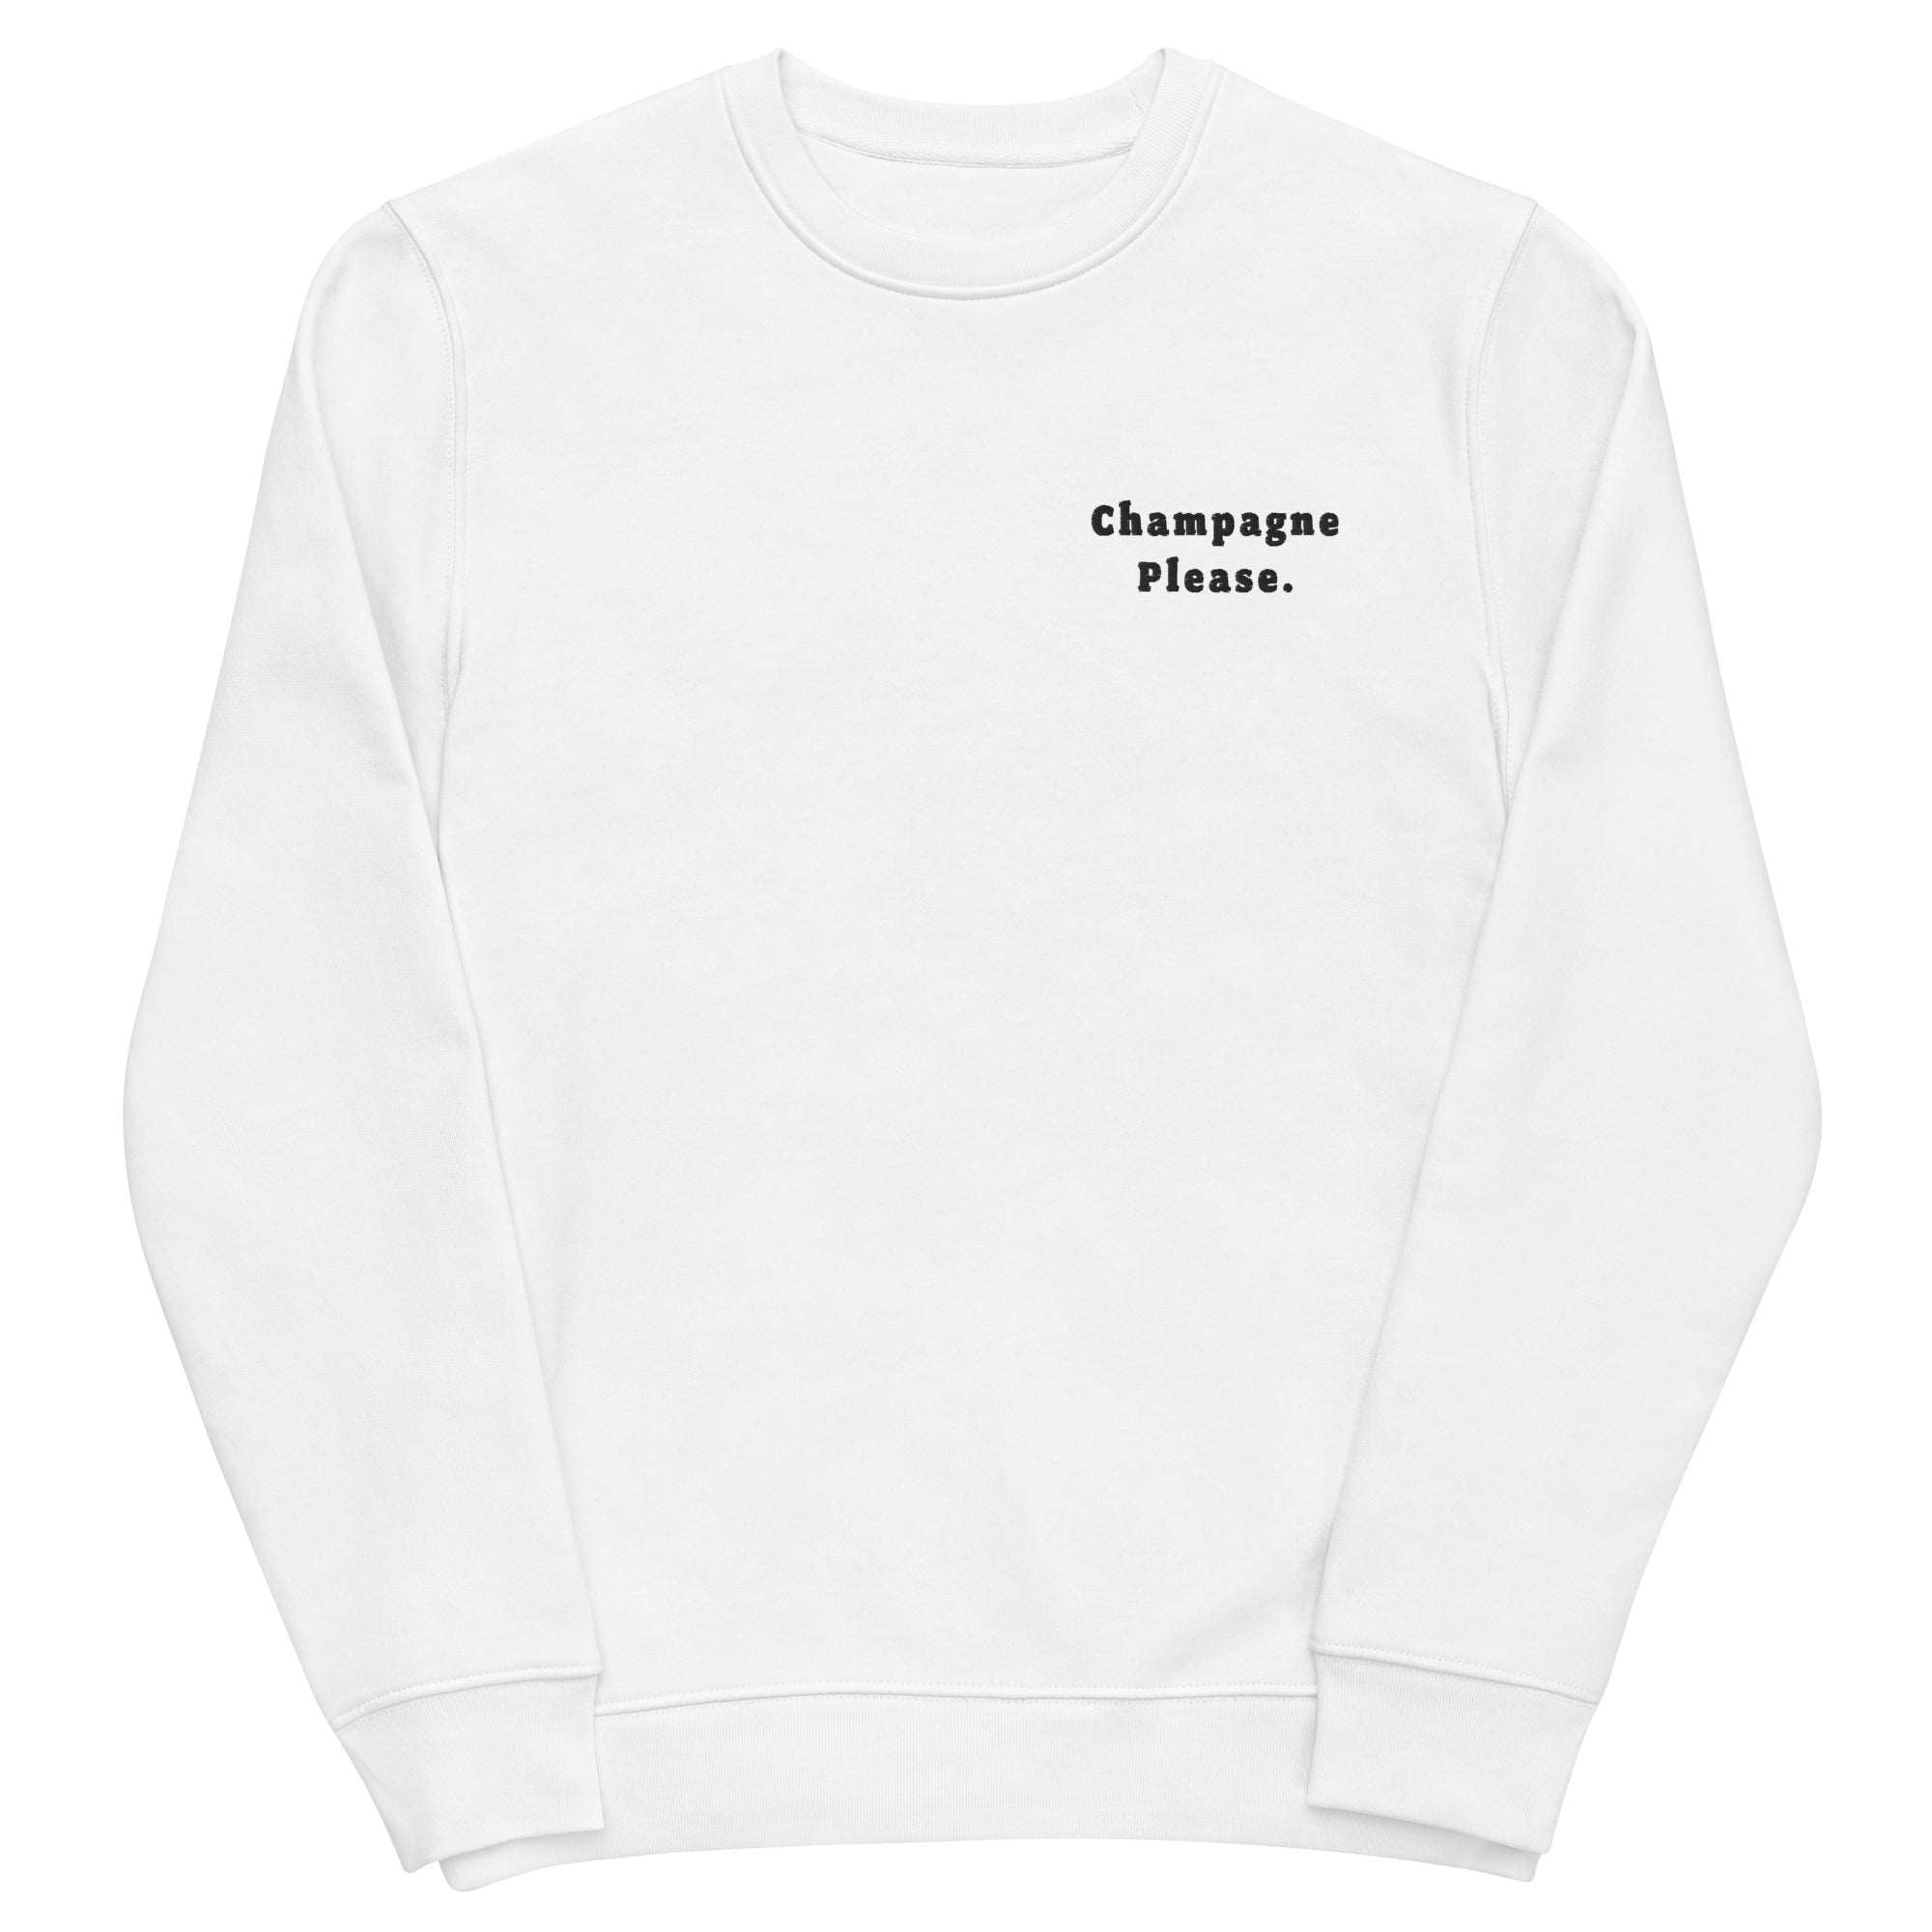 Champagne Please - Organic Embroidered Sweatshirt - The Refined Spirit